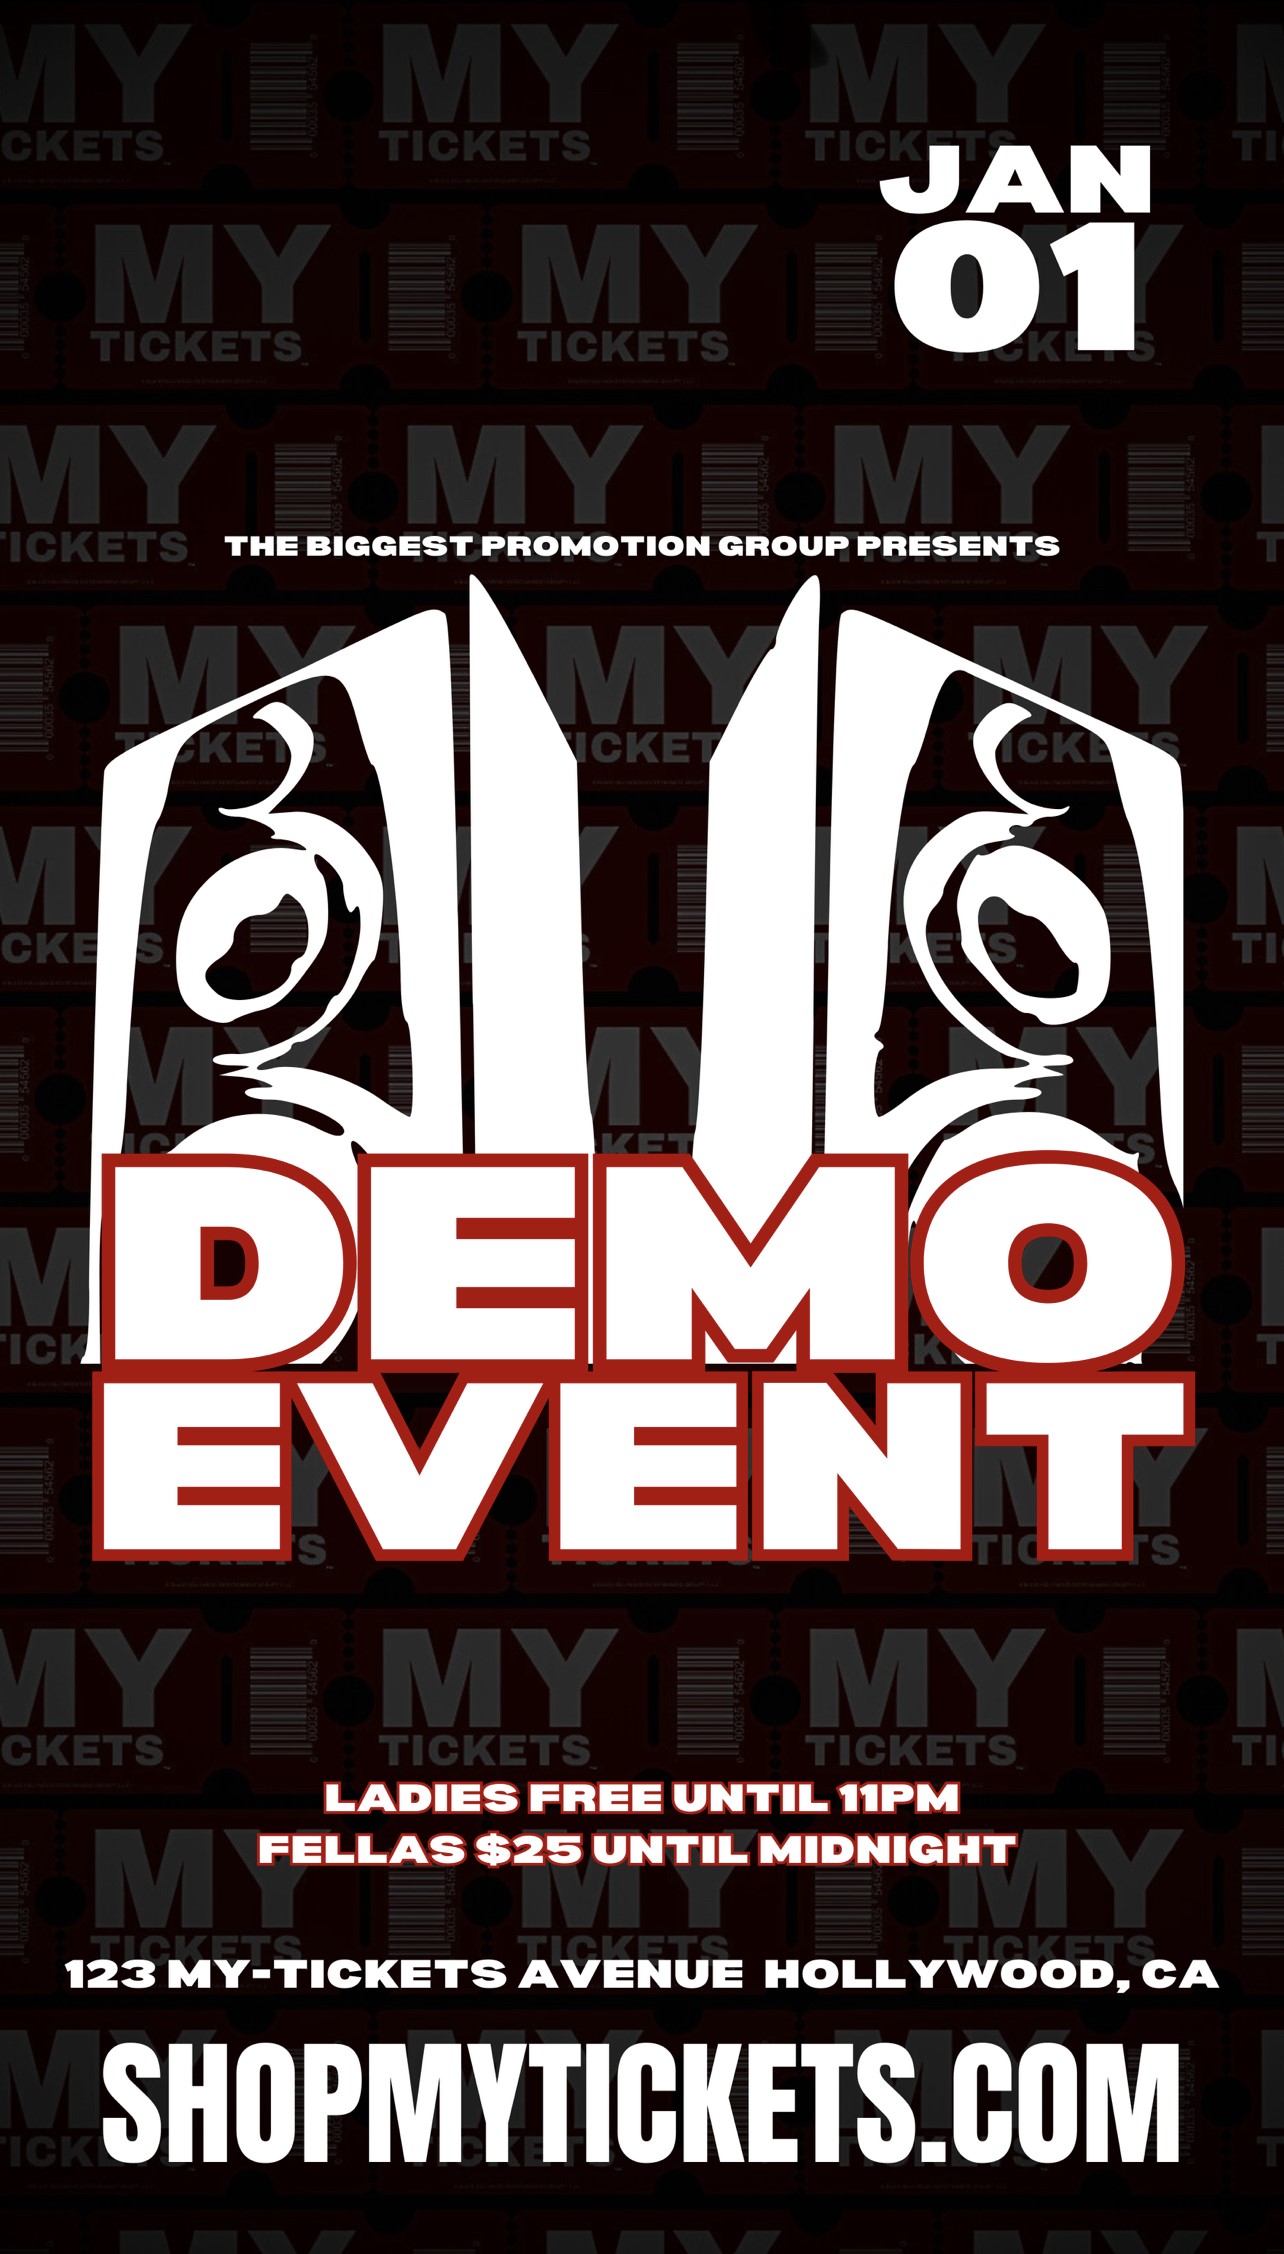 DEMO NIGHT CLUB EVENT REGISTER YOUR EVENT TODAY! on Jan 01, 20:00@CLUB VIP - Pick a seat, Buy tickets and Get information on MY TICKETS™ shopmytickets.com